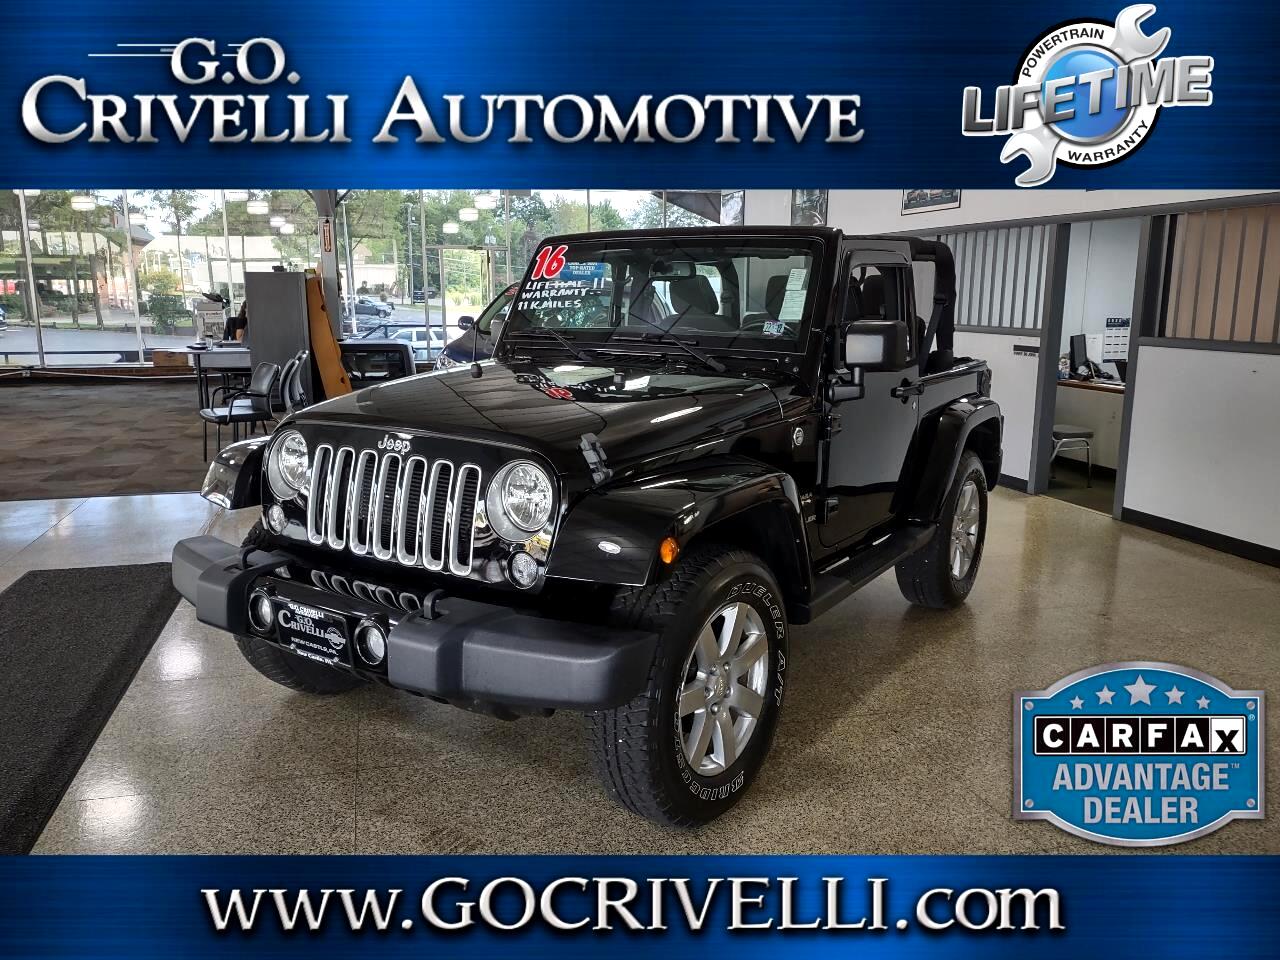 Used 2016 Jeep Wrangler 4WD 2dr Sahara for Sale in New Castle PA 16105 G O  Crivelli Automotive Inc.